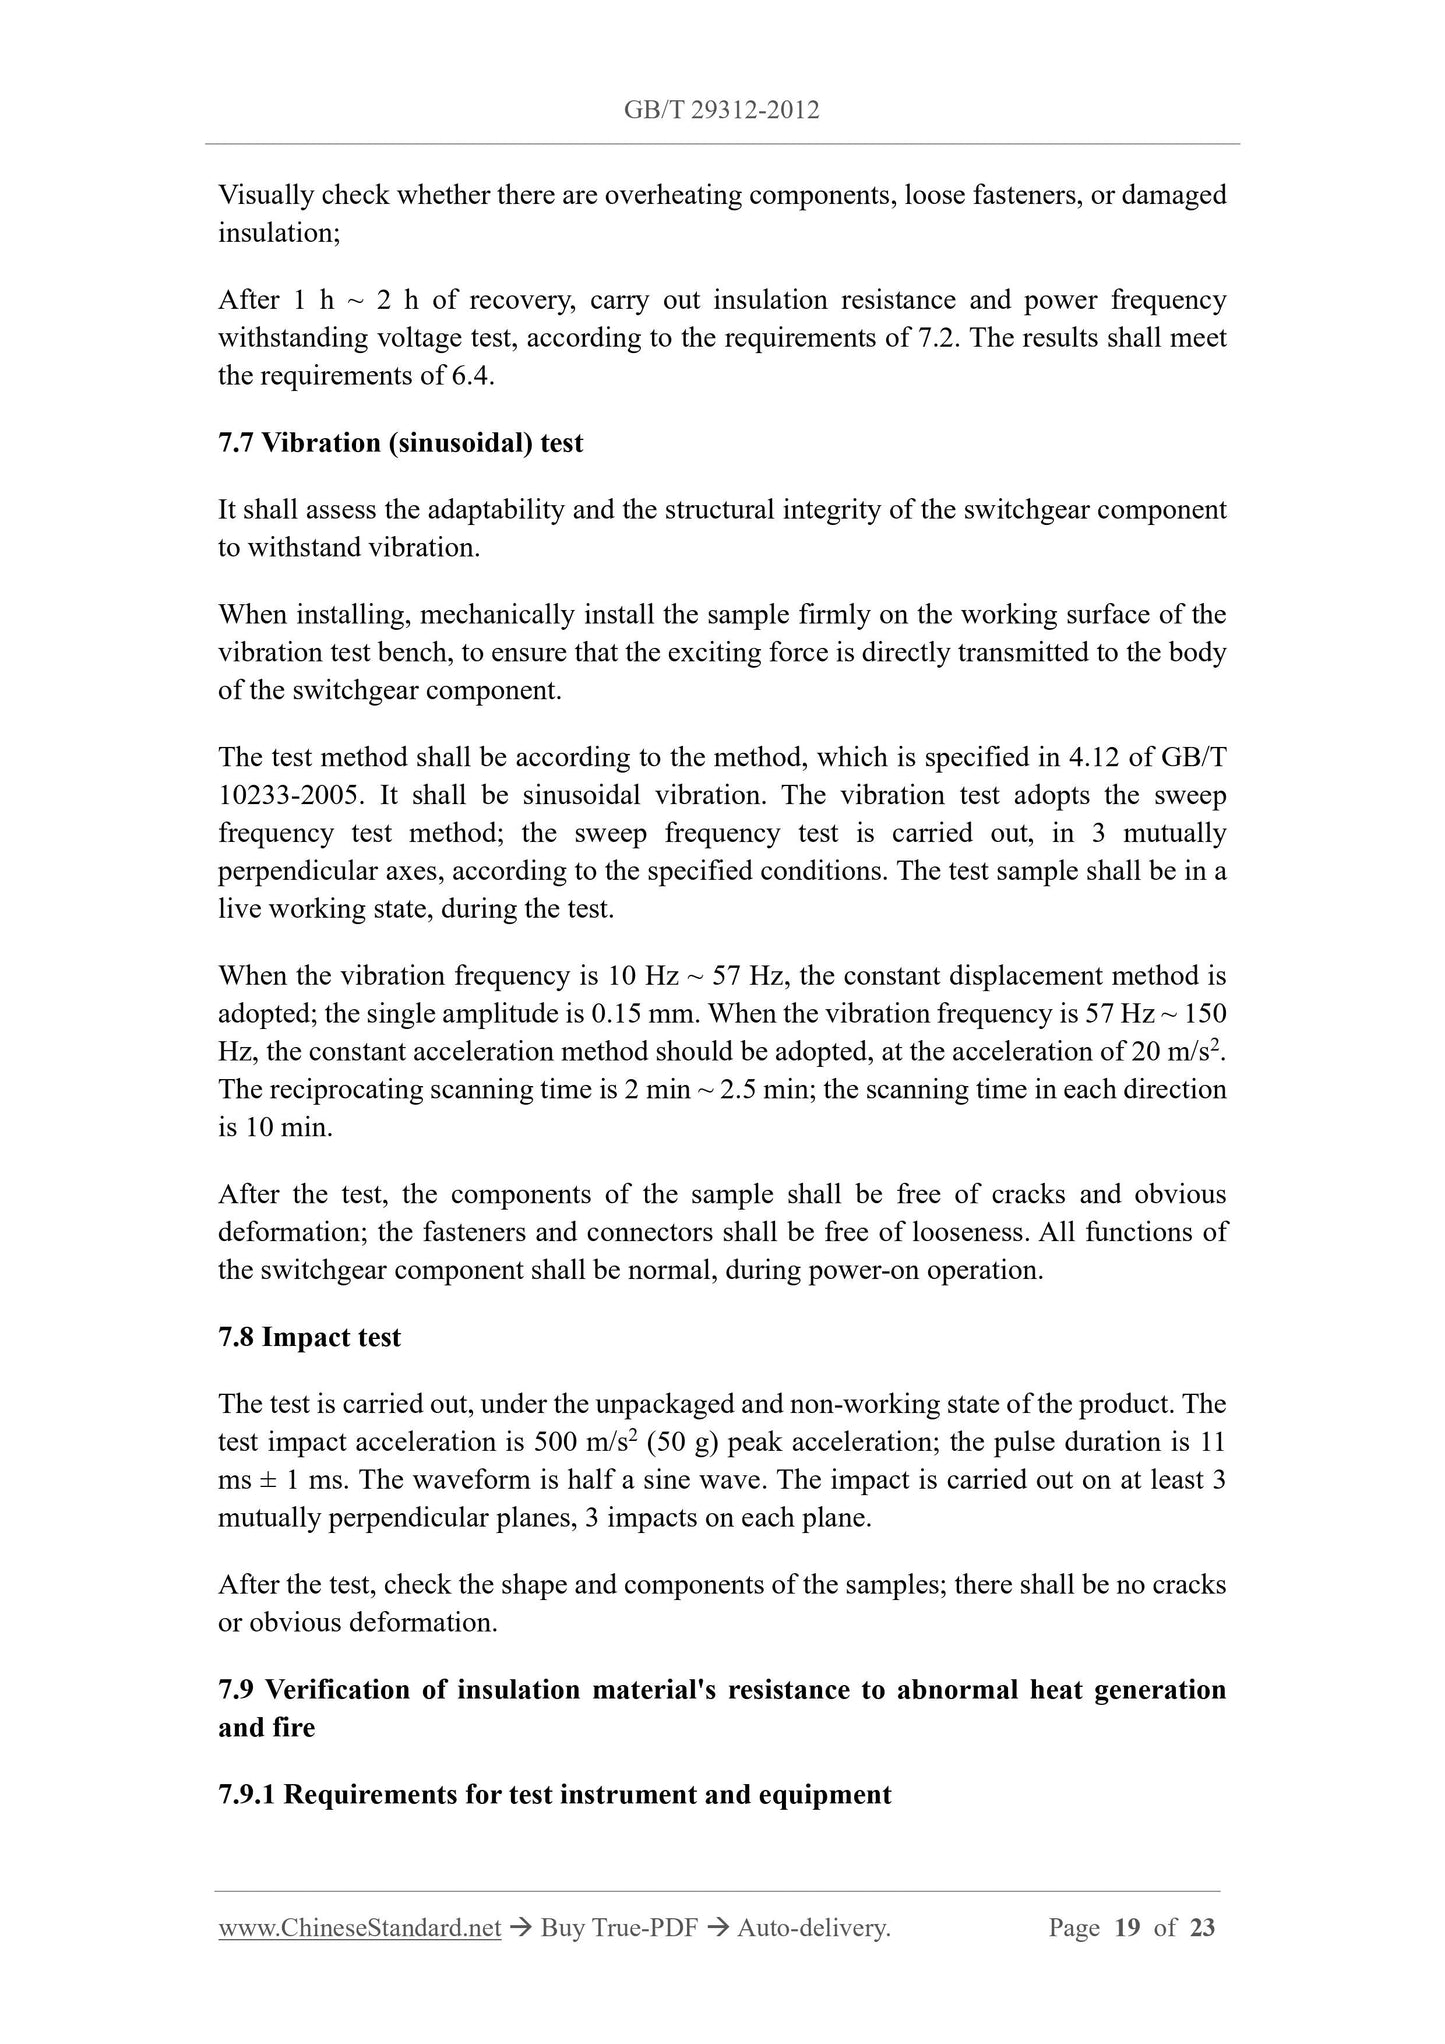 GB/T 29312-2012 Page 11